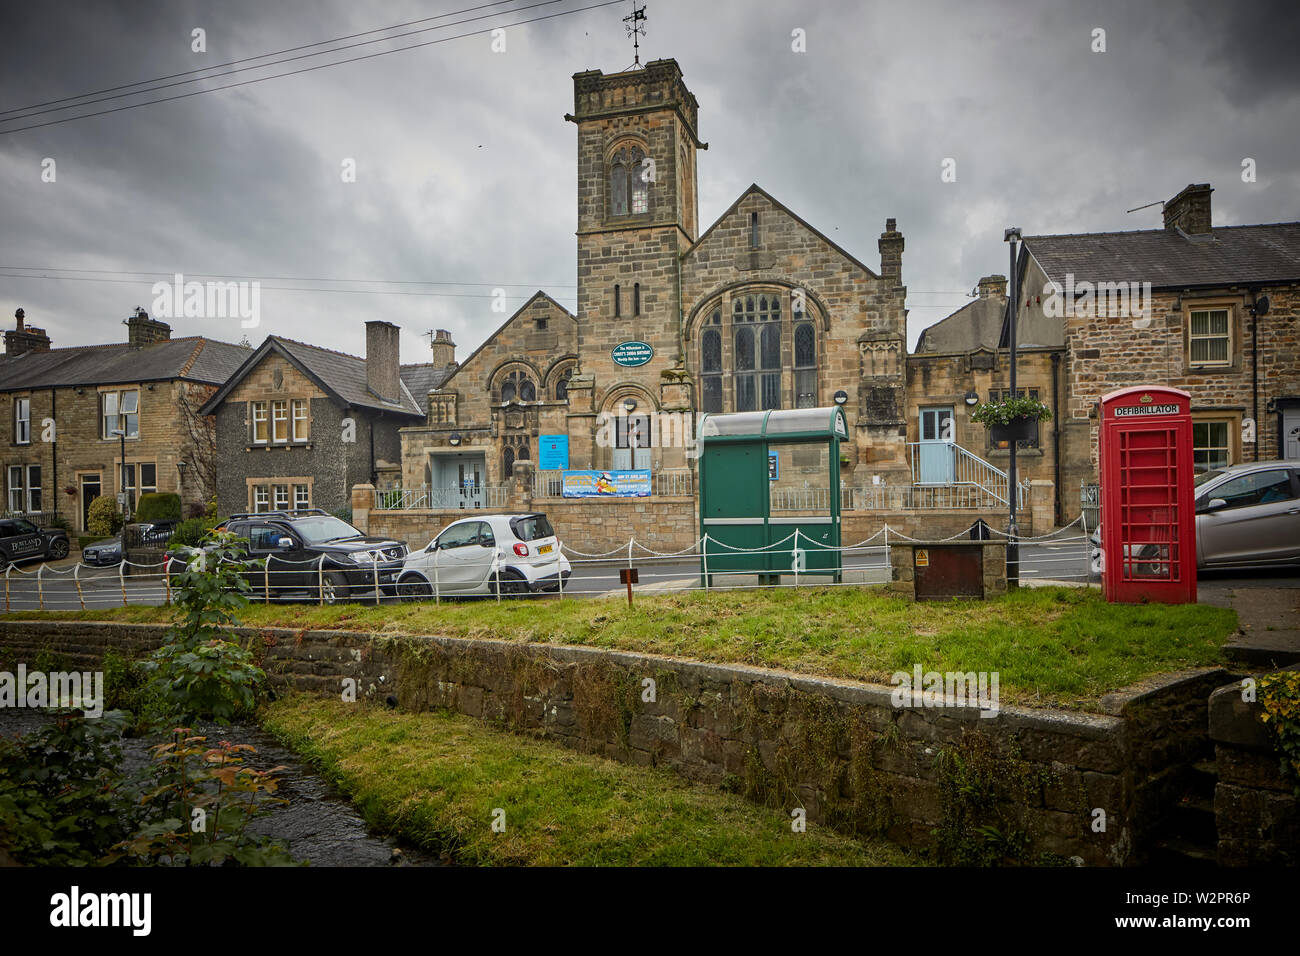 Waddington small picturesque village near Clitheroe in the Ribble Valley, Lancashire, Waddington Methodist Church in The Square with hr brook running Stock Photo